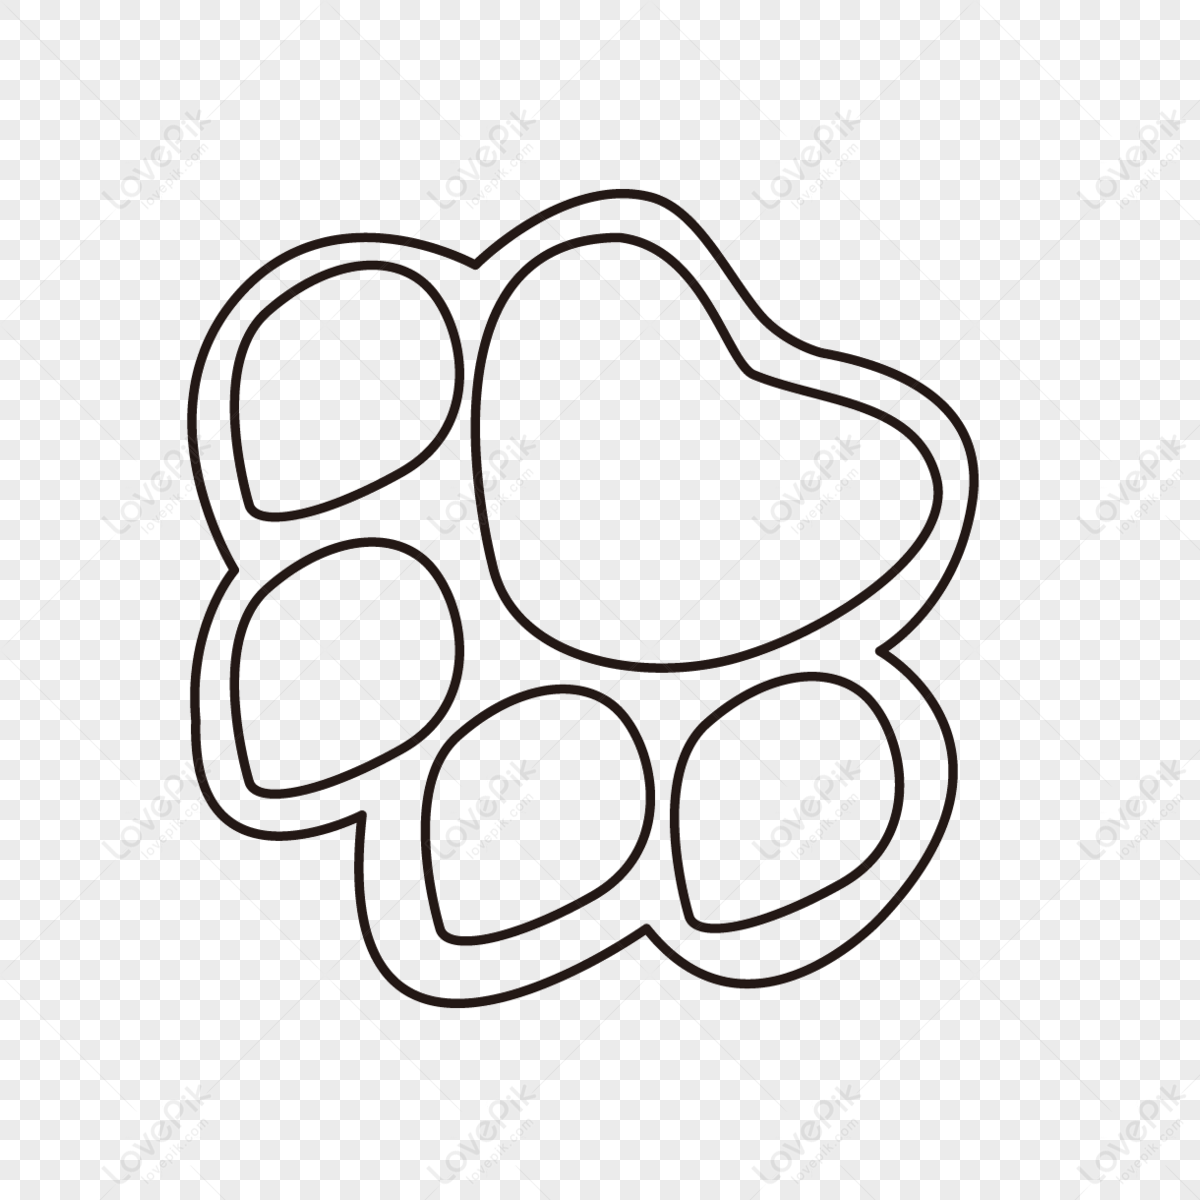 Black and white animal footprints paw clipart,soles,palms png image free download